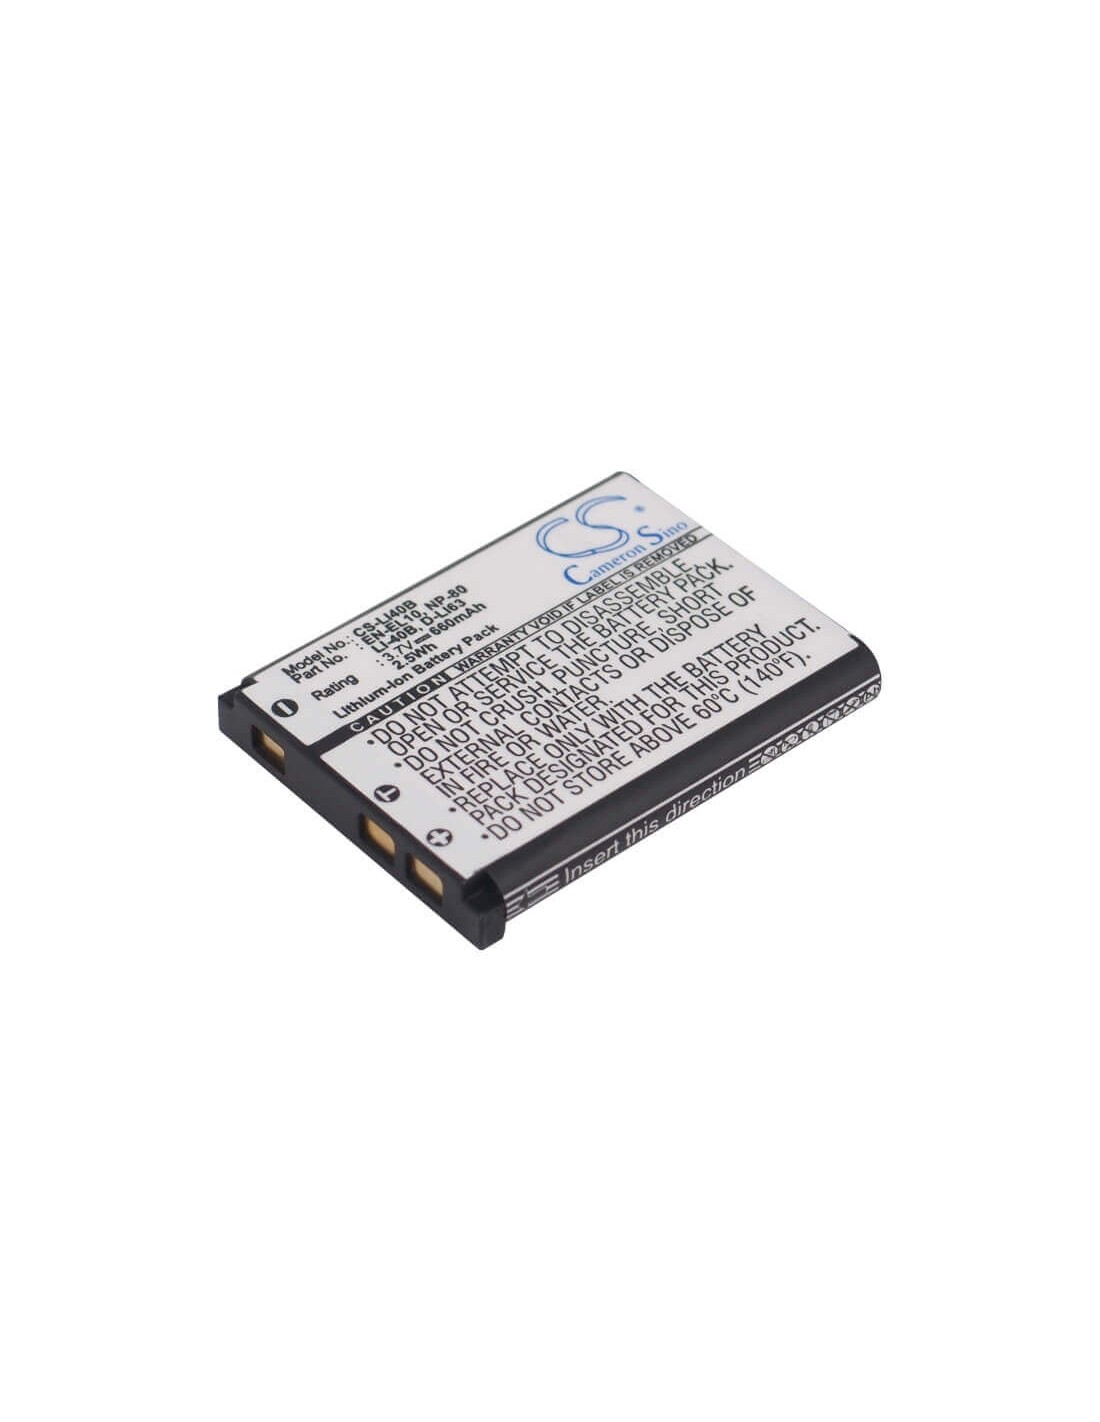 Battery for Rollei Cl-102, Cl-122, Cl-202, Cl-312, 3.7V, 660mAh - 2.44Wh